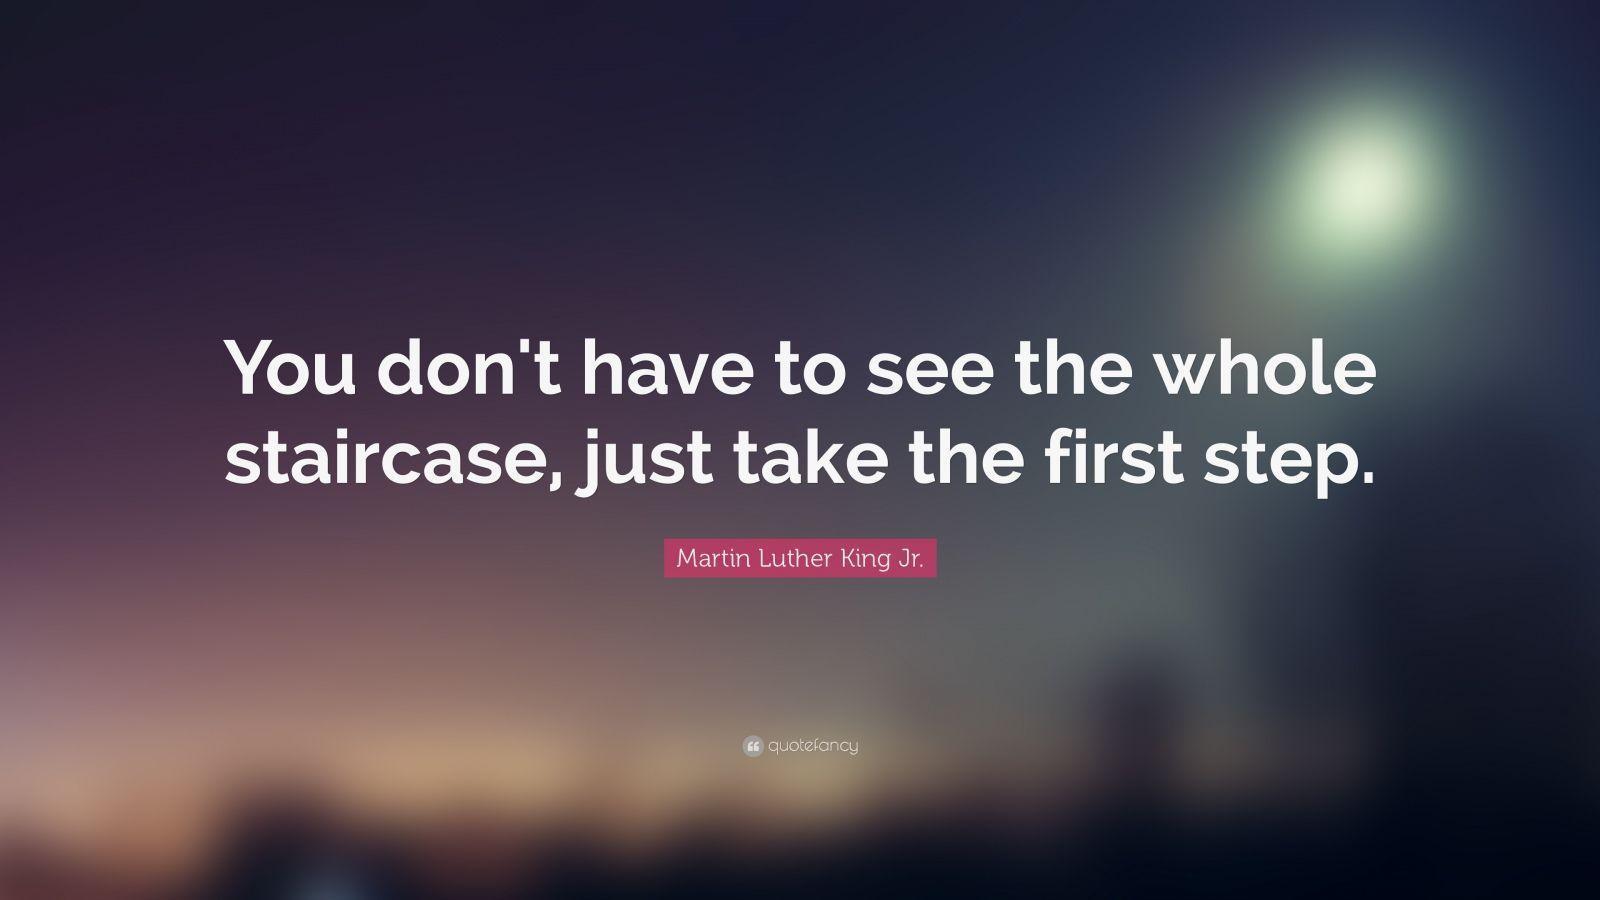 Martin Luther King Jr. Quotes (100 wallpaper)